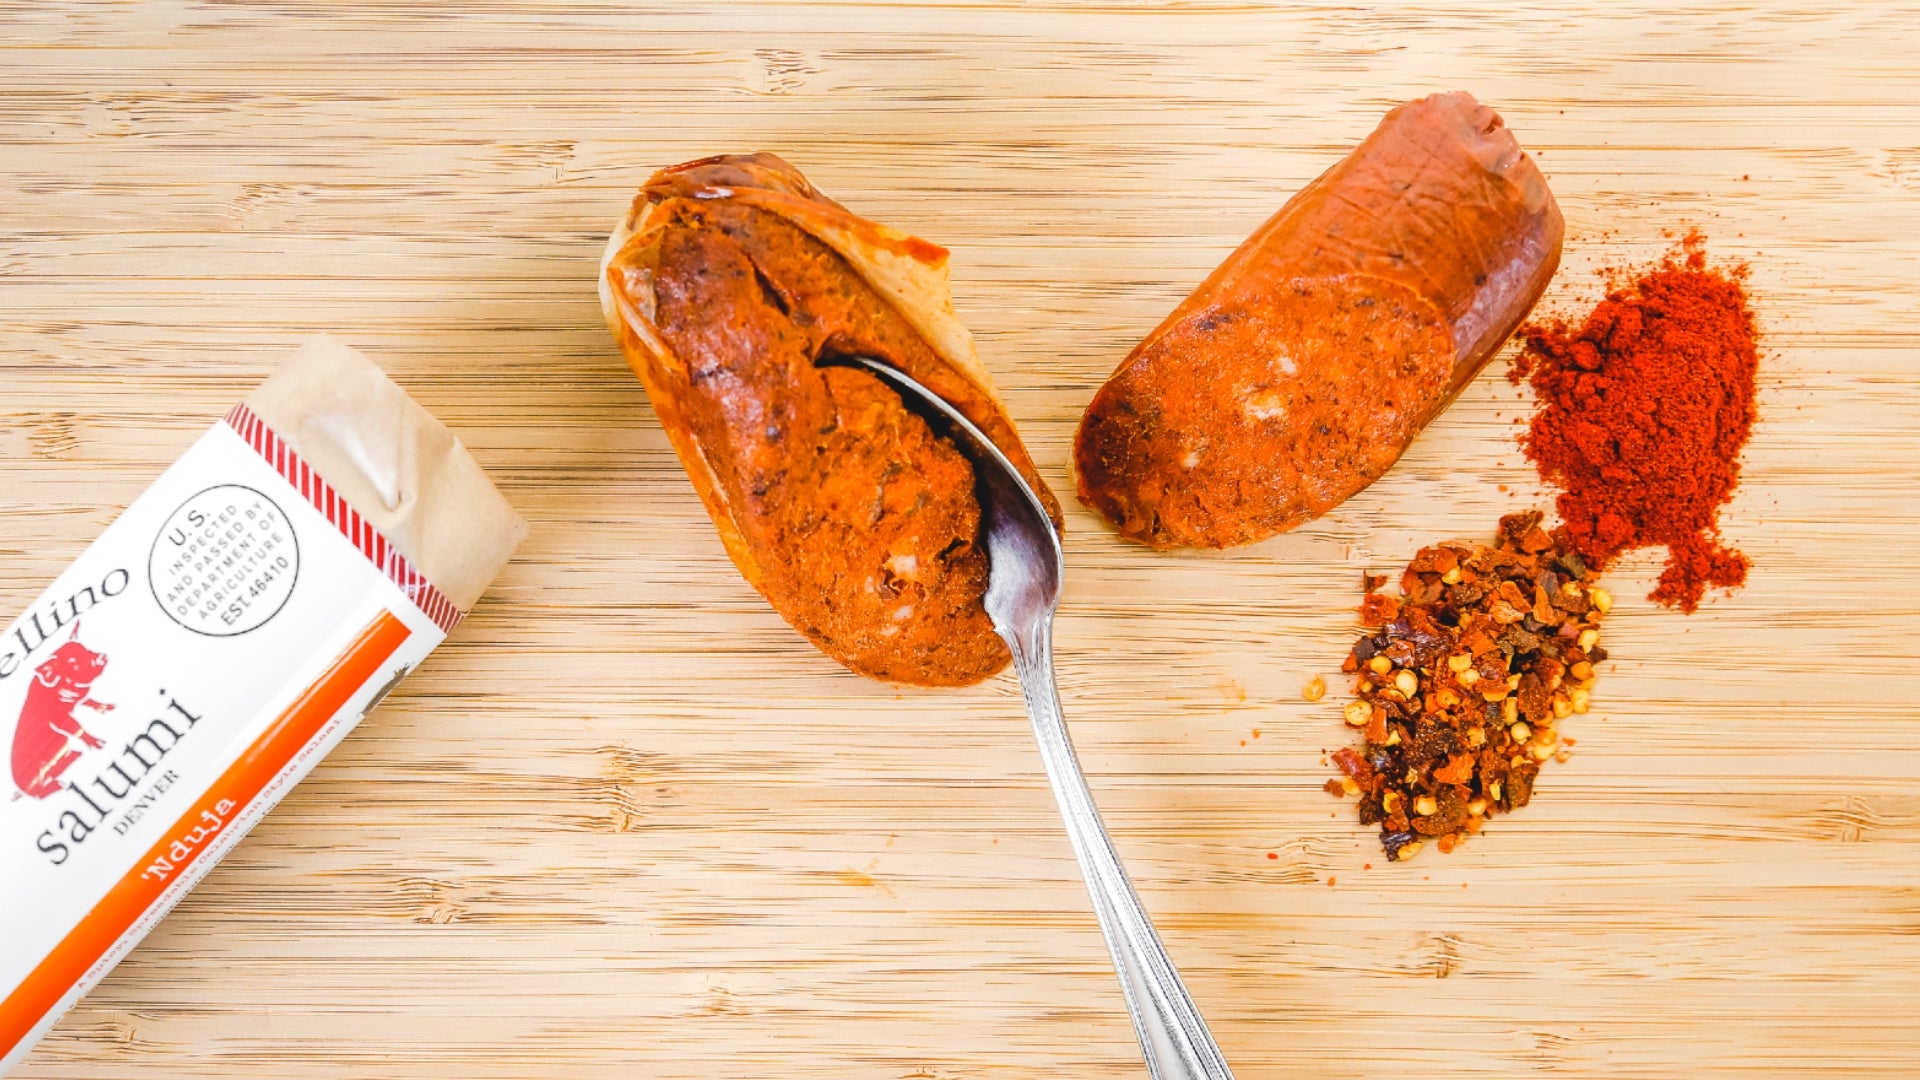 A picture shot from above of 'Nduja Salami on a cutting board. One chub of the salami is in it's packaging while the other chub has a spoon cutting into it to show that it's spreadable.